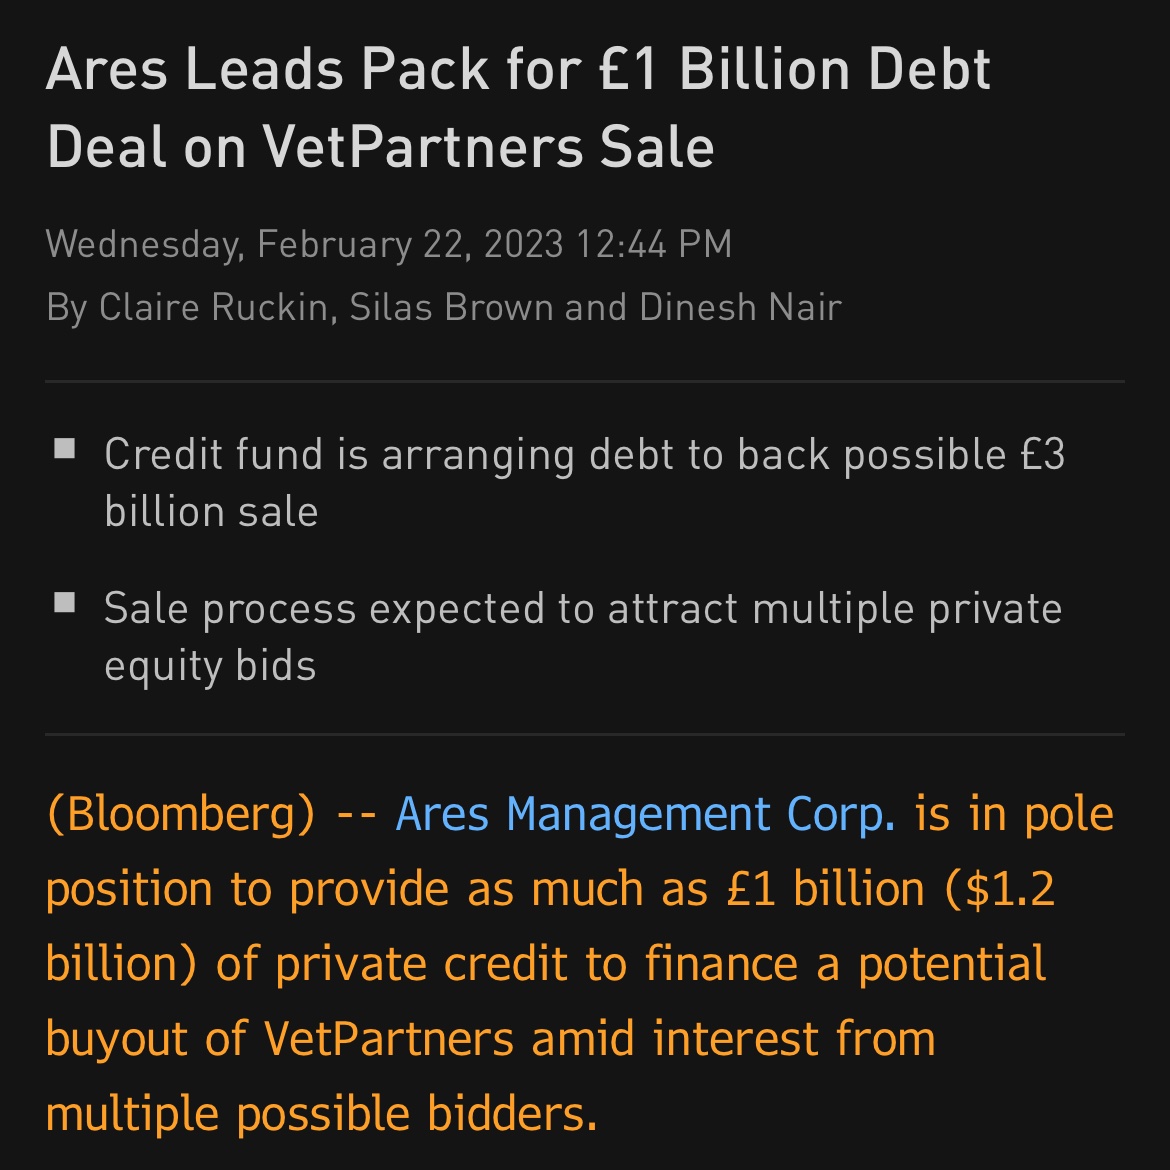 Ares Leads Pack for £1 Billion Debt Deal on VetPartners Sale

On @TheTerminal